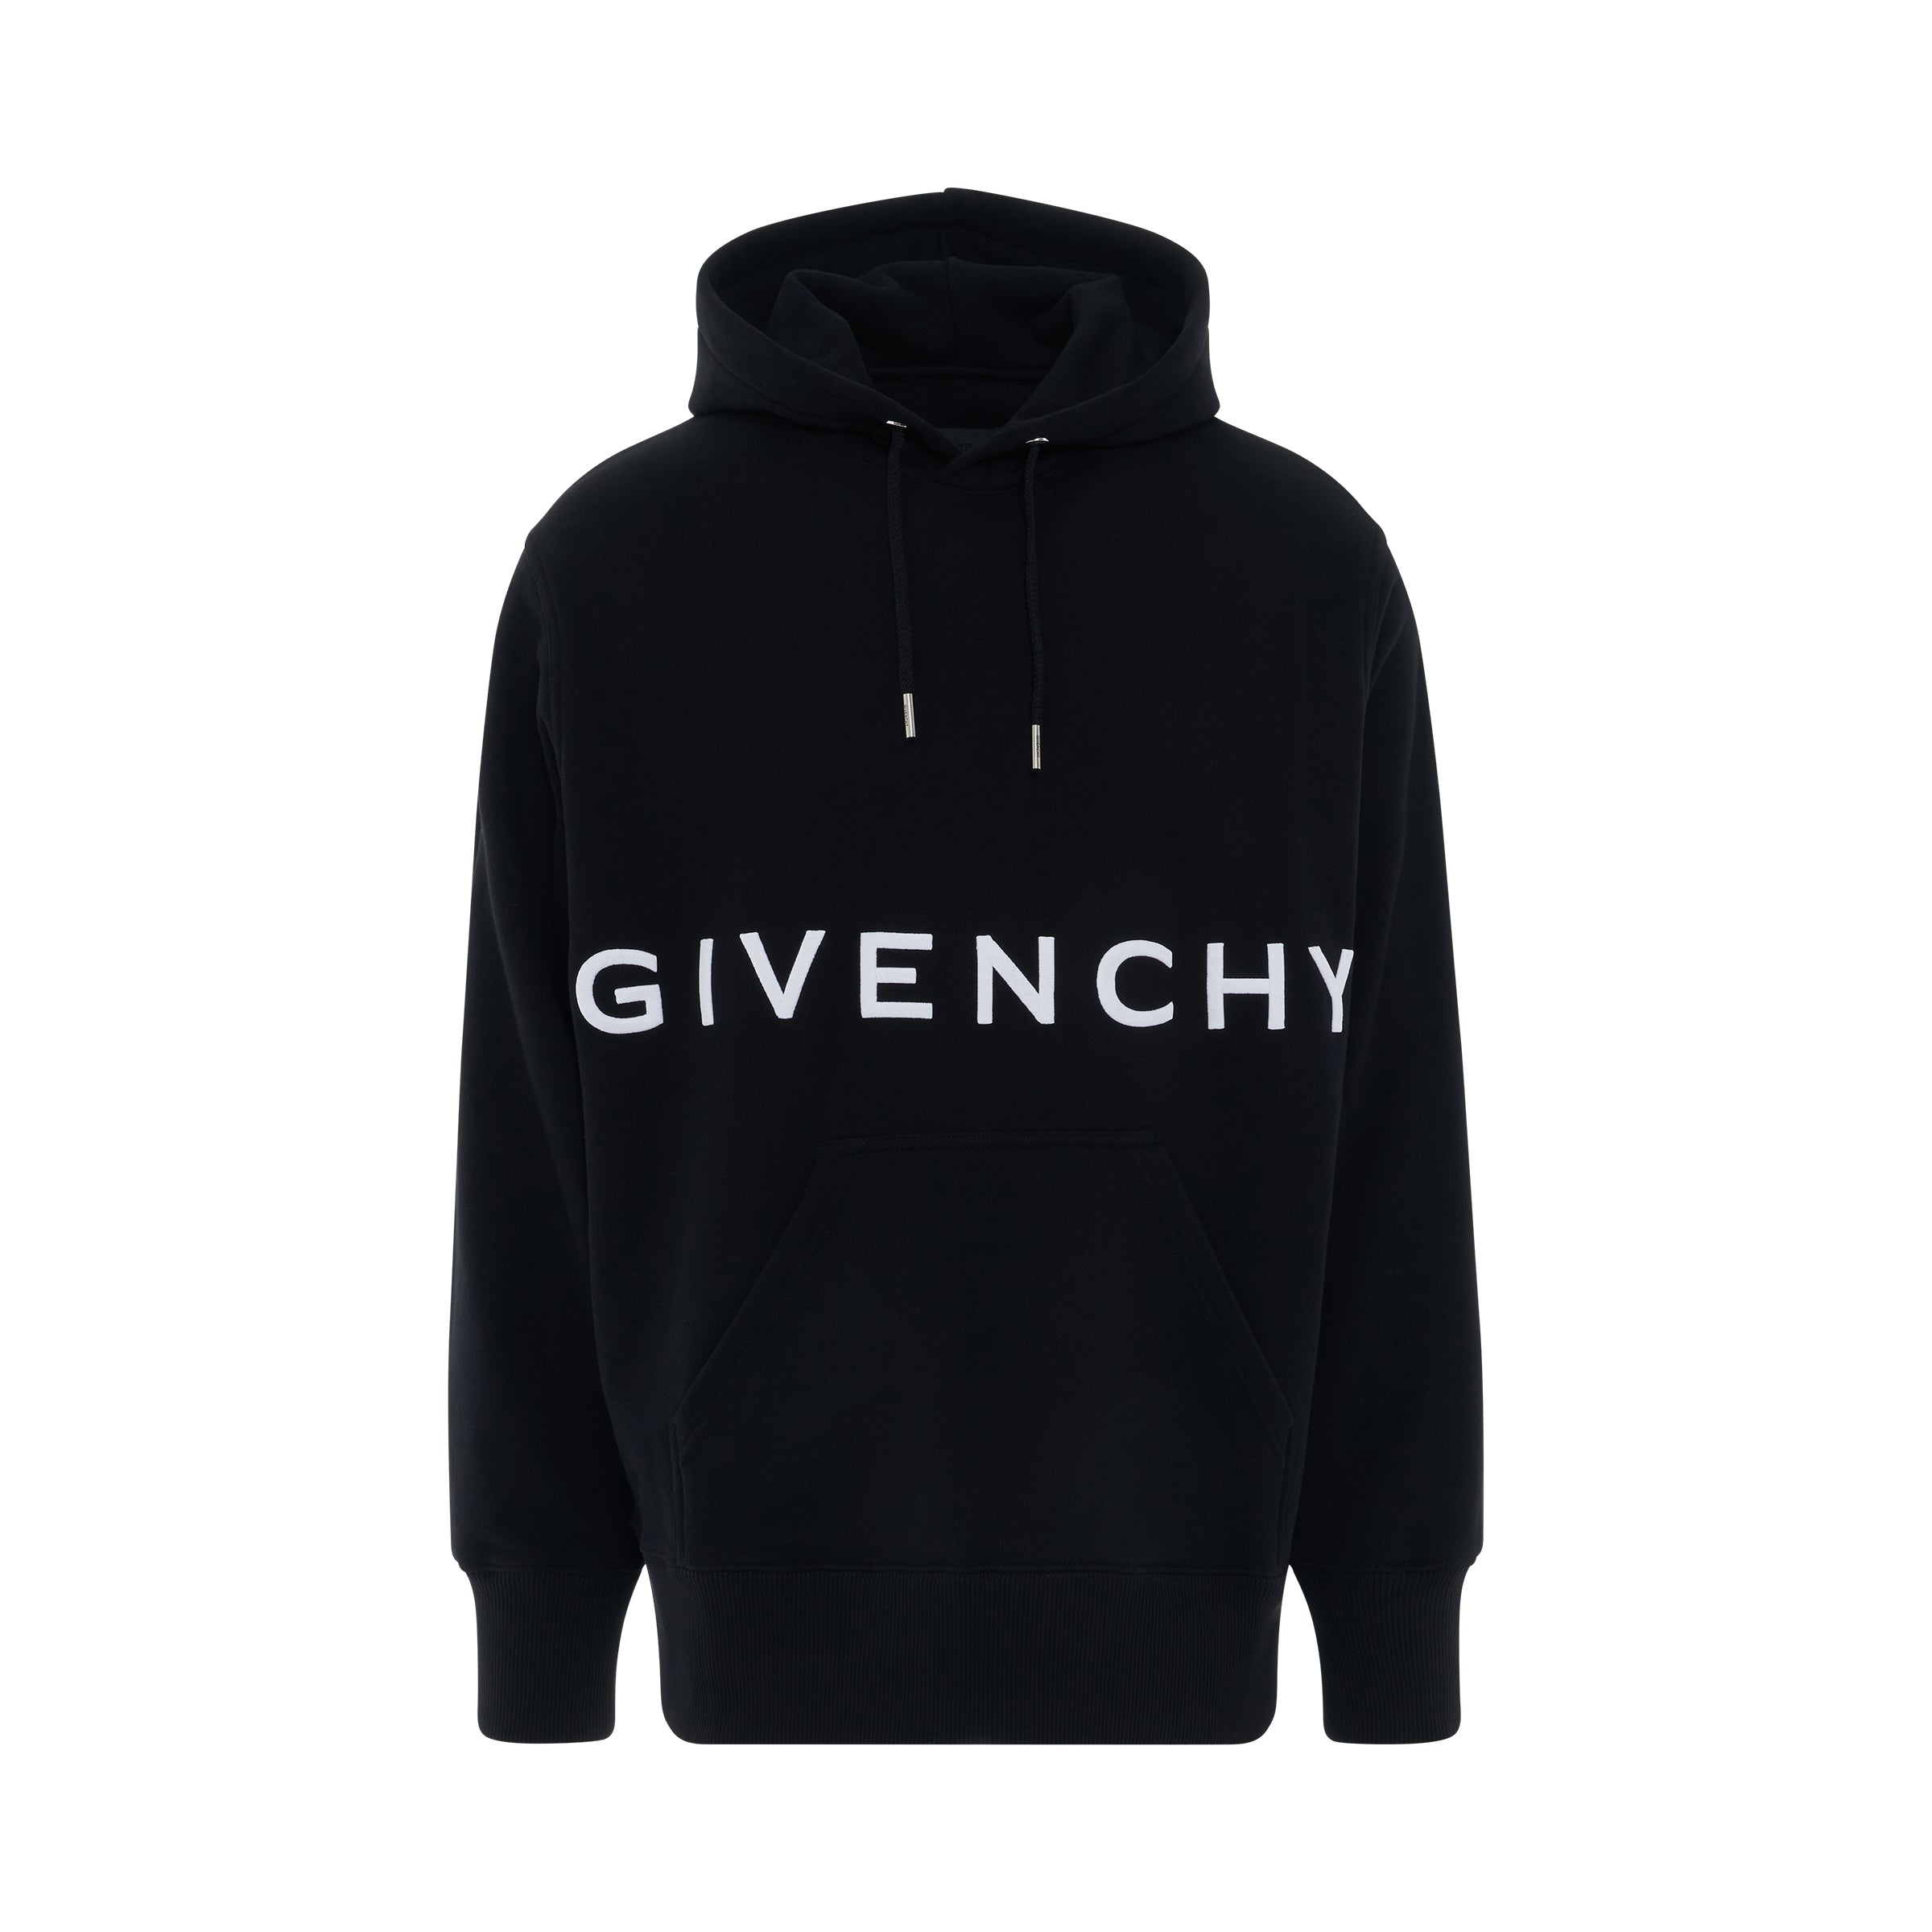 givenchy embroidered logo classic fit hoodie in black sold out sold out ...